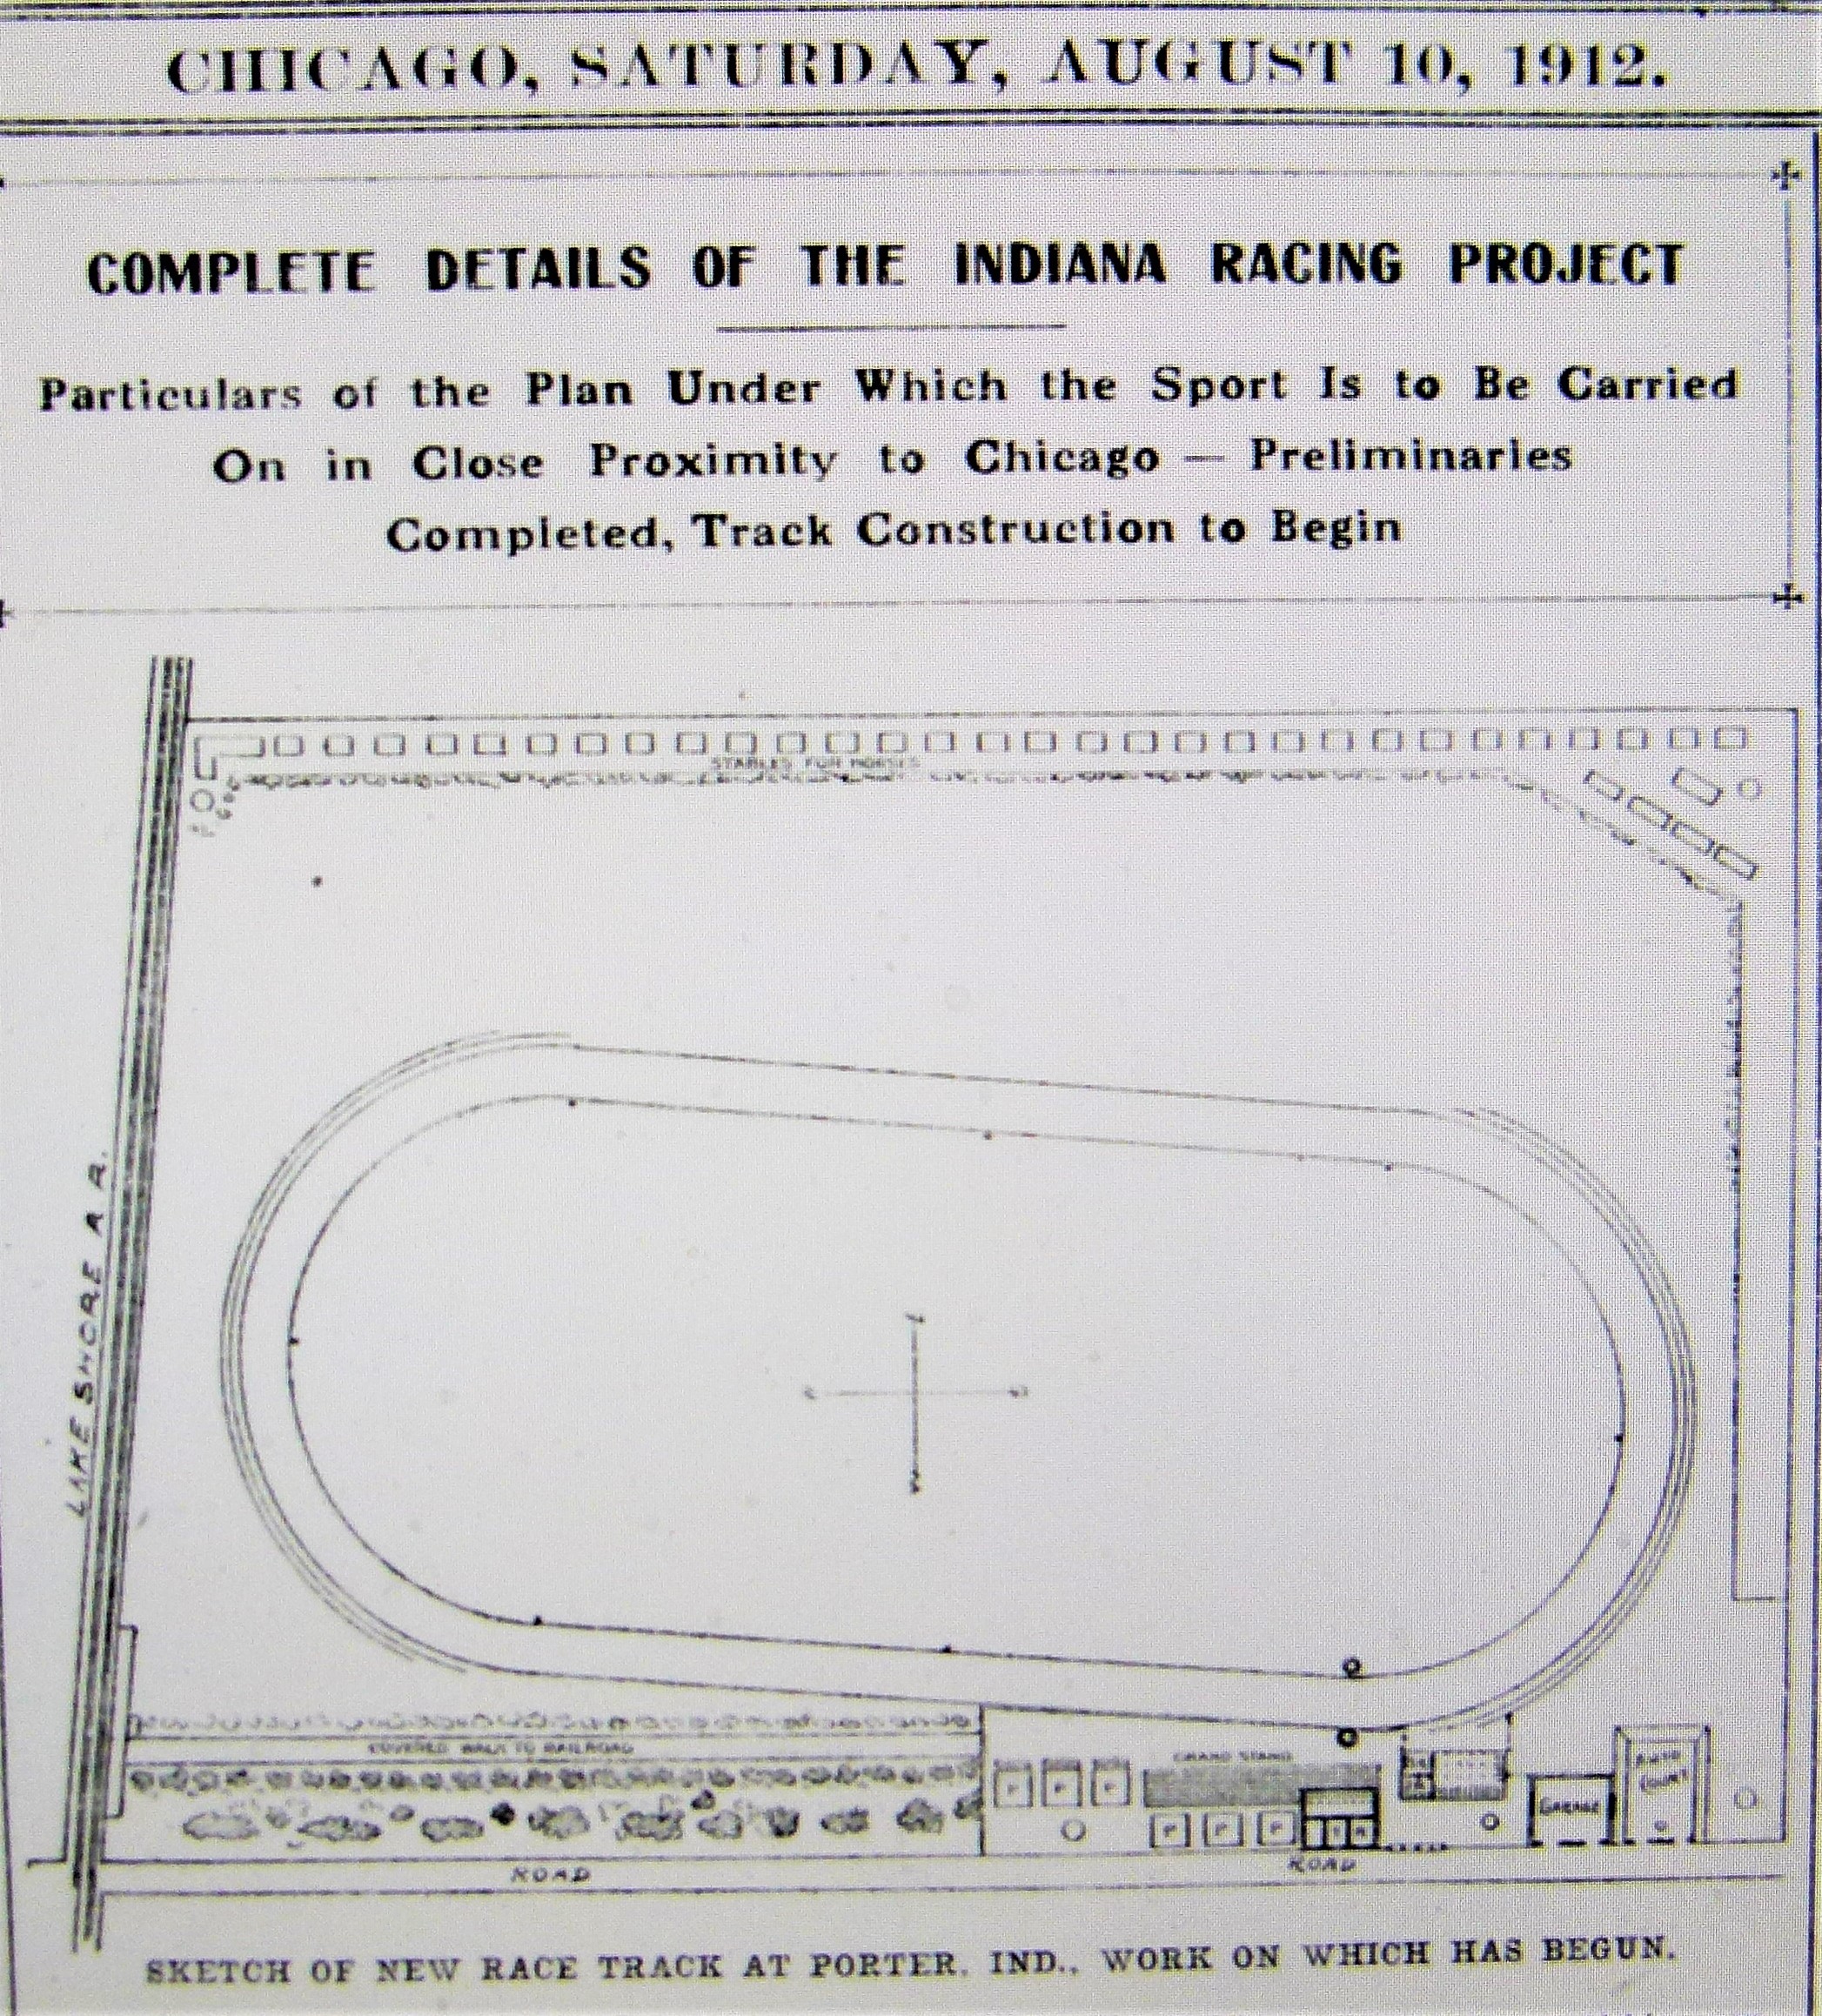 An illustration of the Mineral Springs track as it appeared on the front page of the Daily Racing Form